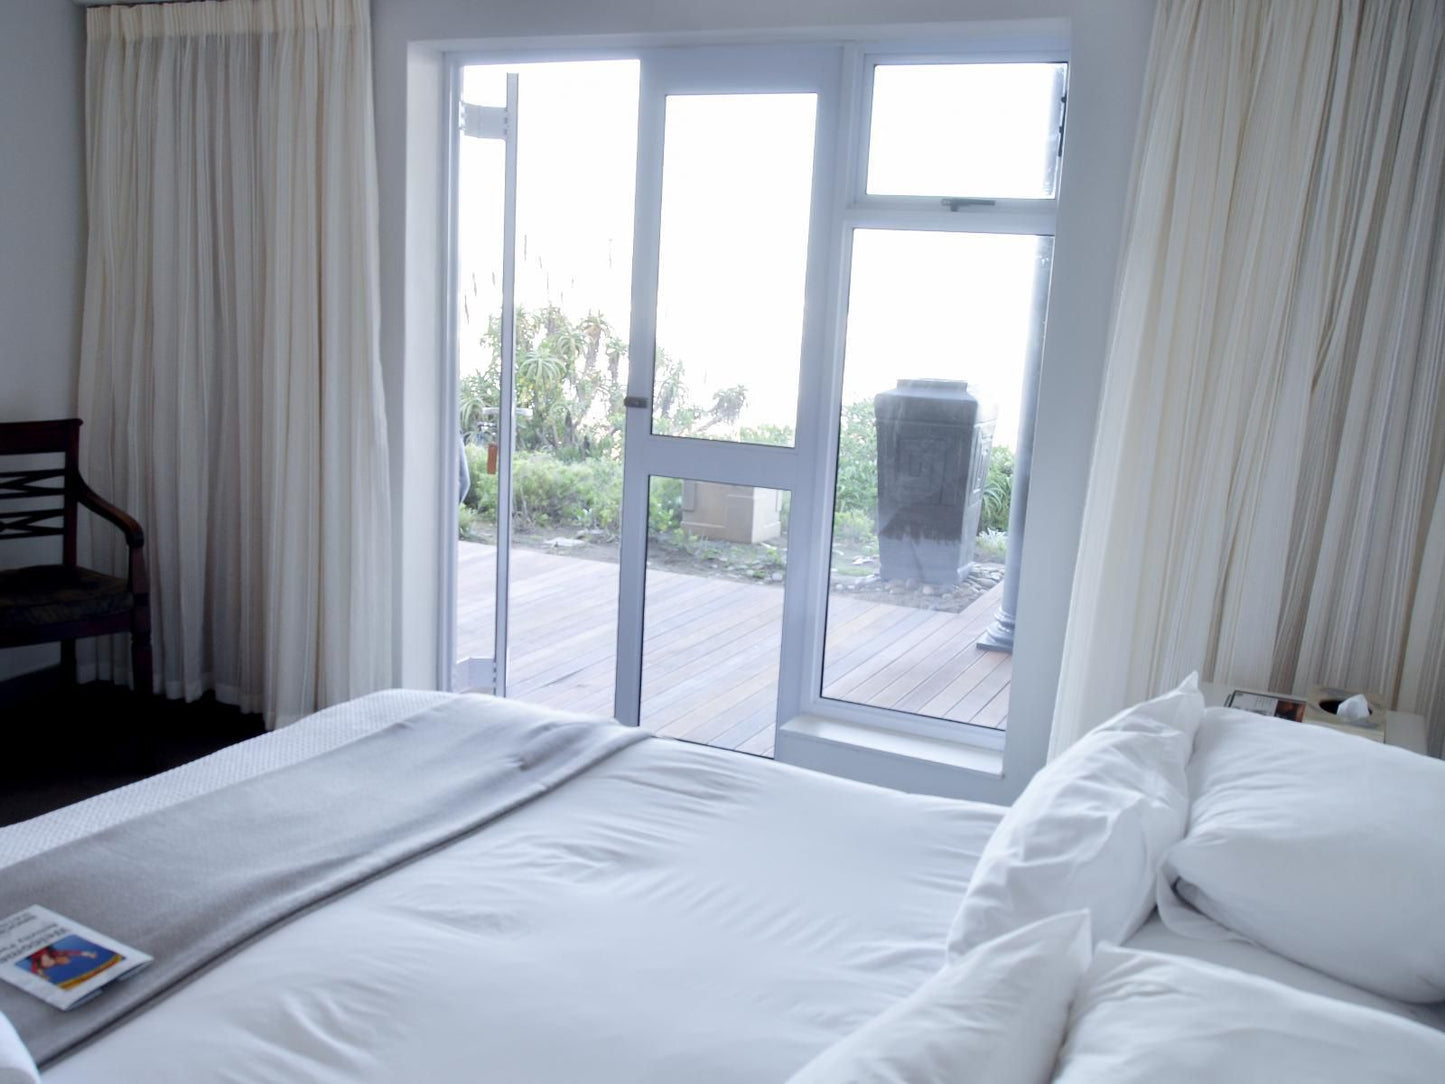 Sea Paradise Wilderness Western Cape South Africa Bedroom